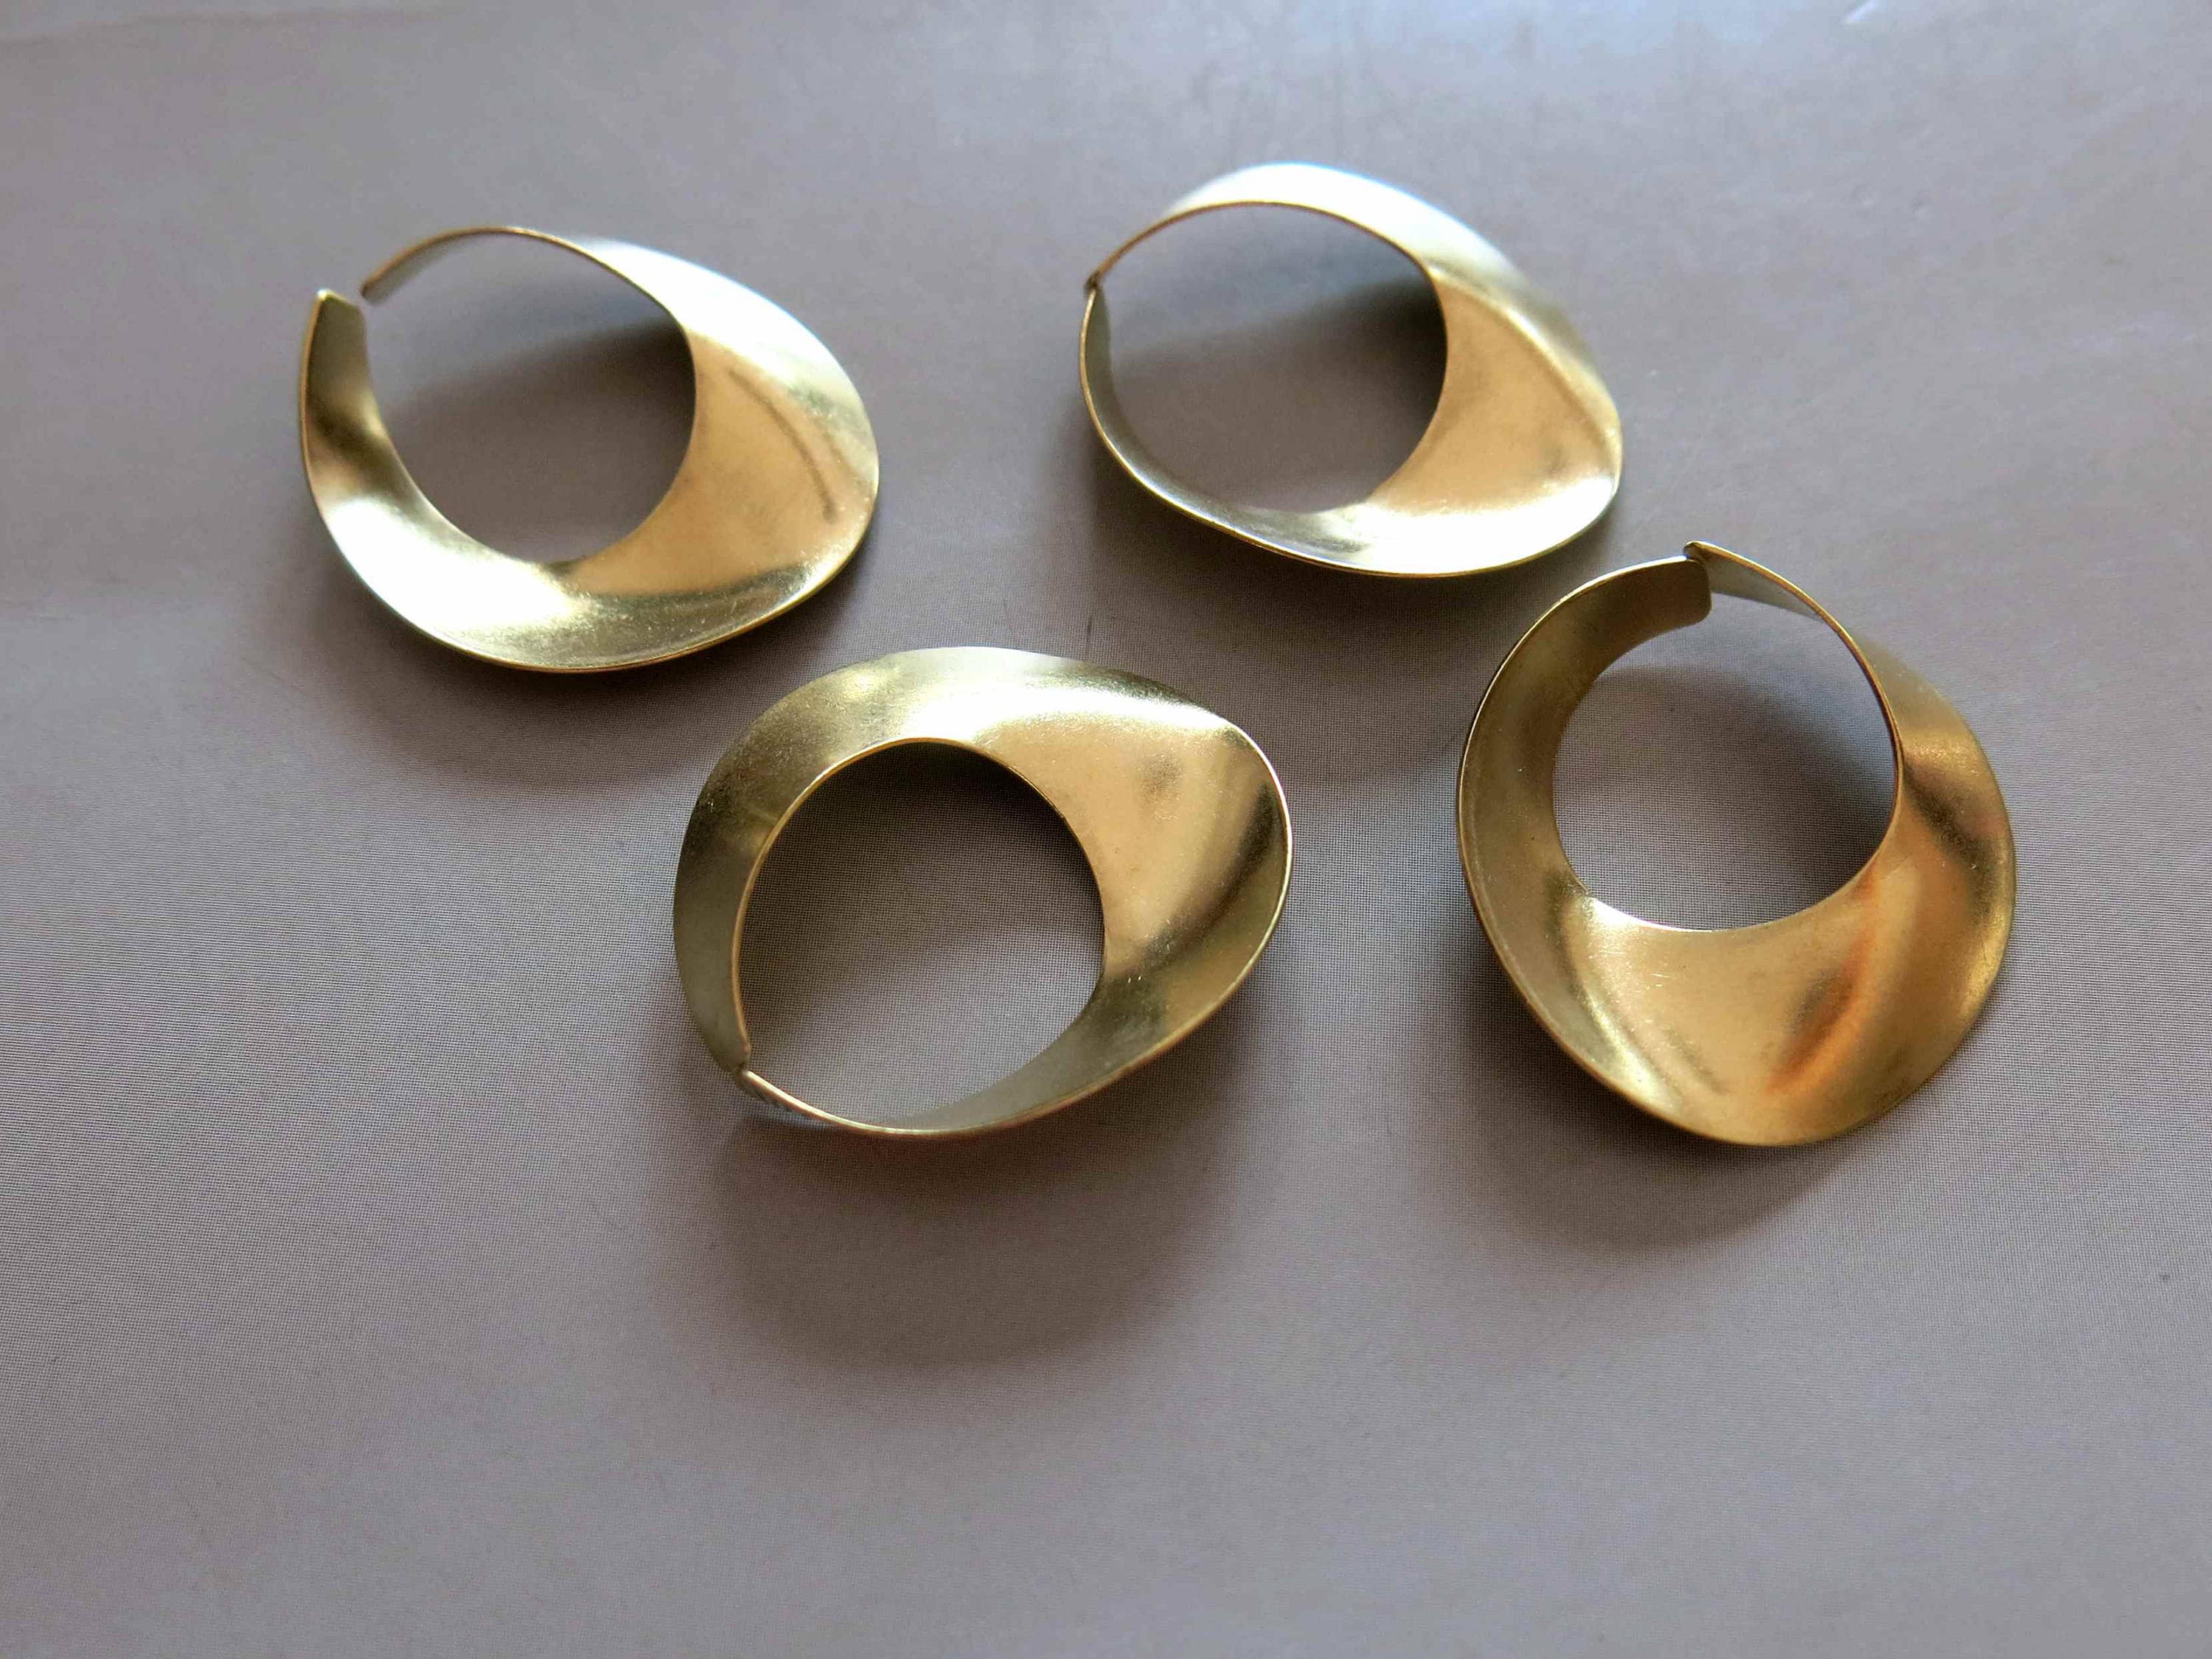 Round Earring Charm Round Ring Findings M27Tc 28 mm Raw Brass Round Charm Brass Laser Cut Findings Round Connector Ring Charm